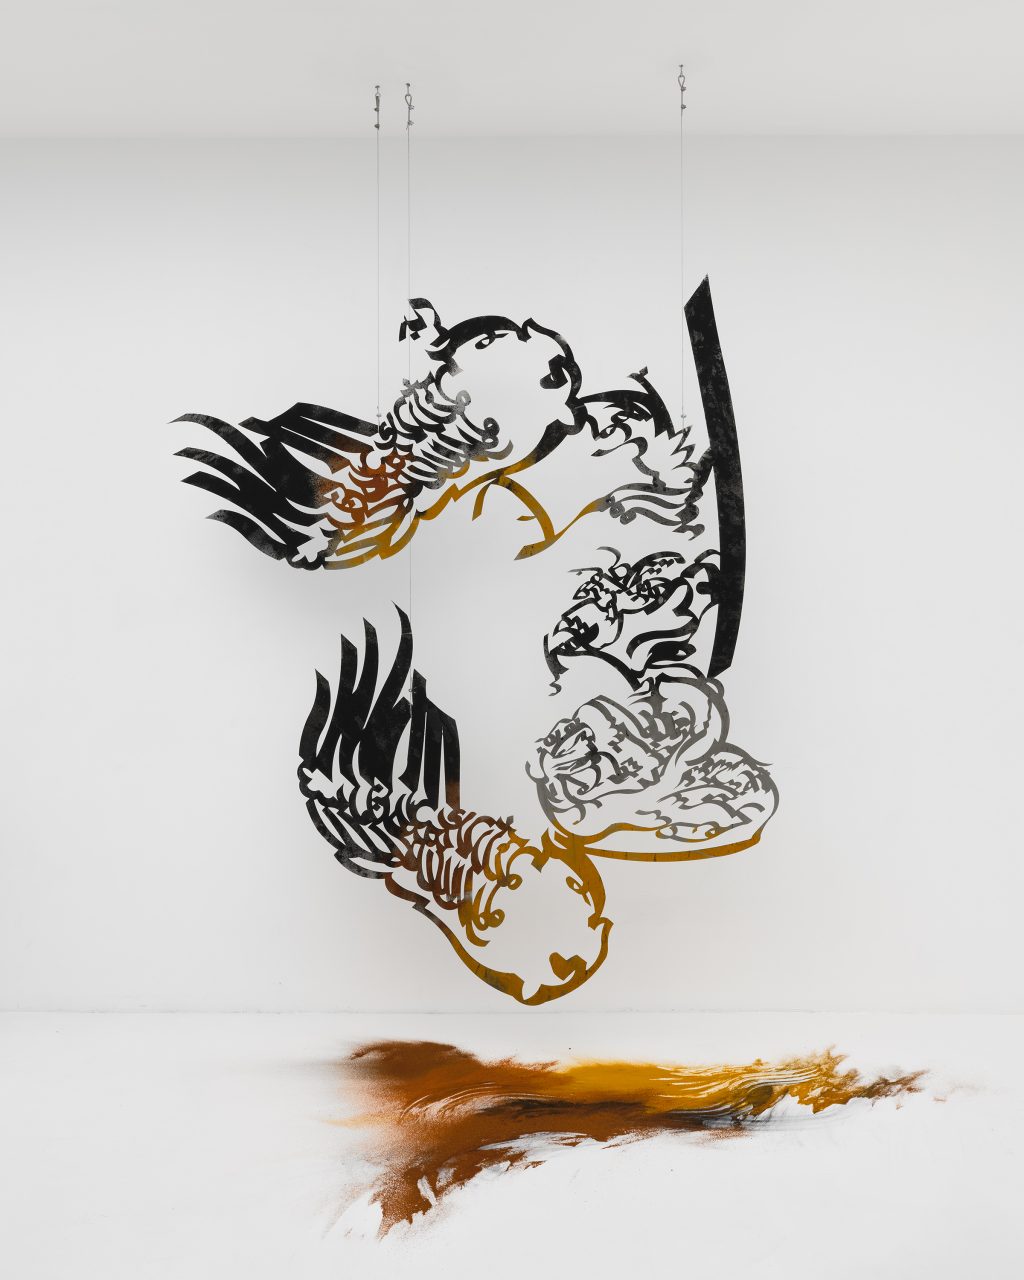 <p>CHERTLÜDDE</p>
<p> </p>
<p>Monia Ben Hamouda, “Denial of a Redwing Blackbird (Aniconism as Figuration Urgency)”, 2022; installation view at ASHES/ASHES, New York, 2022, Photo: New Document, Courtesy of ASHES/ASHES, New York and Monia Ben Hamouda, Milan and ChertLüdde, Berlin</p>
